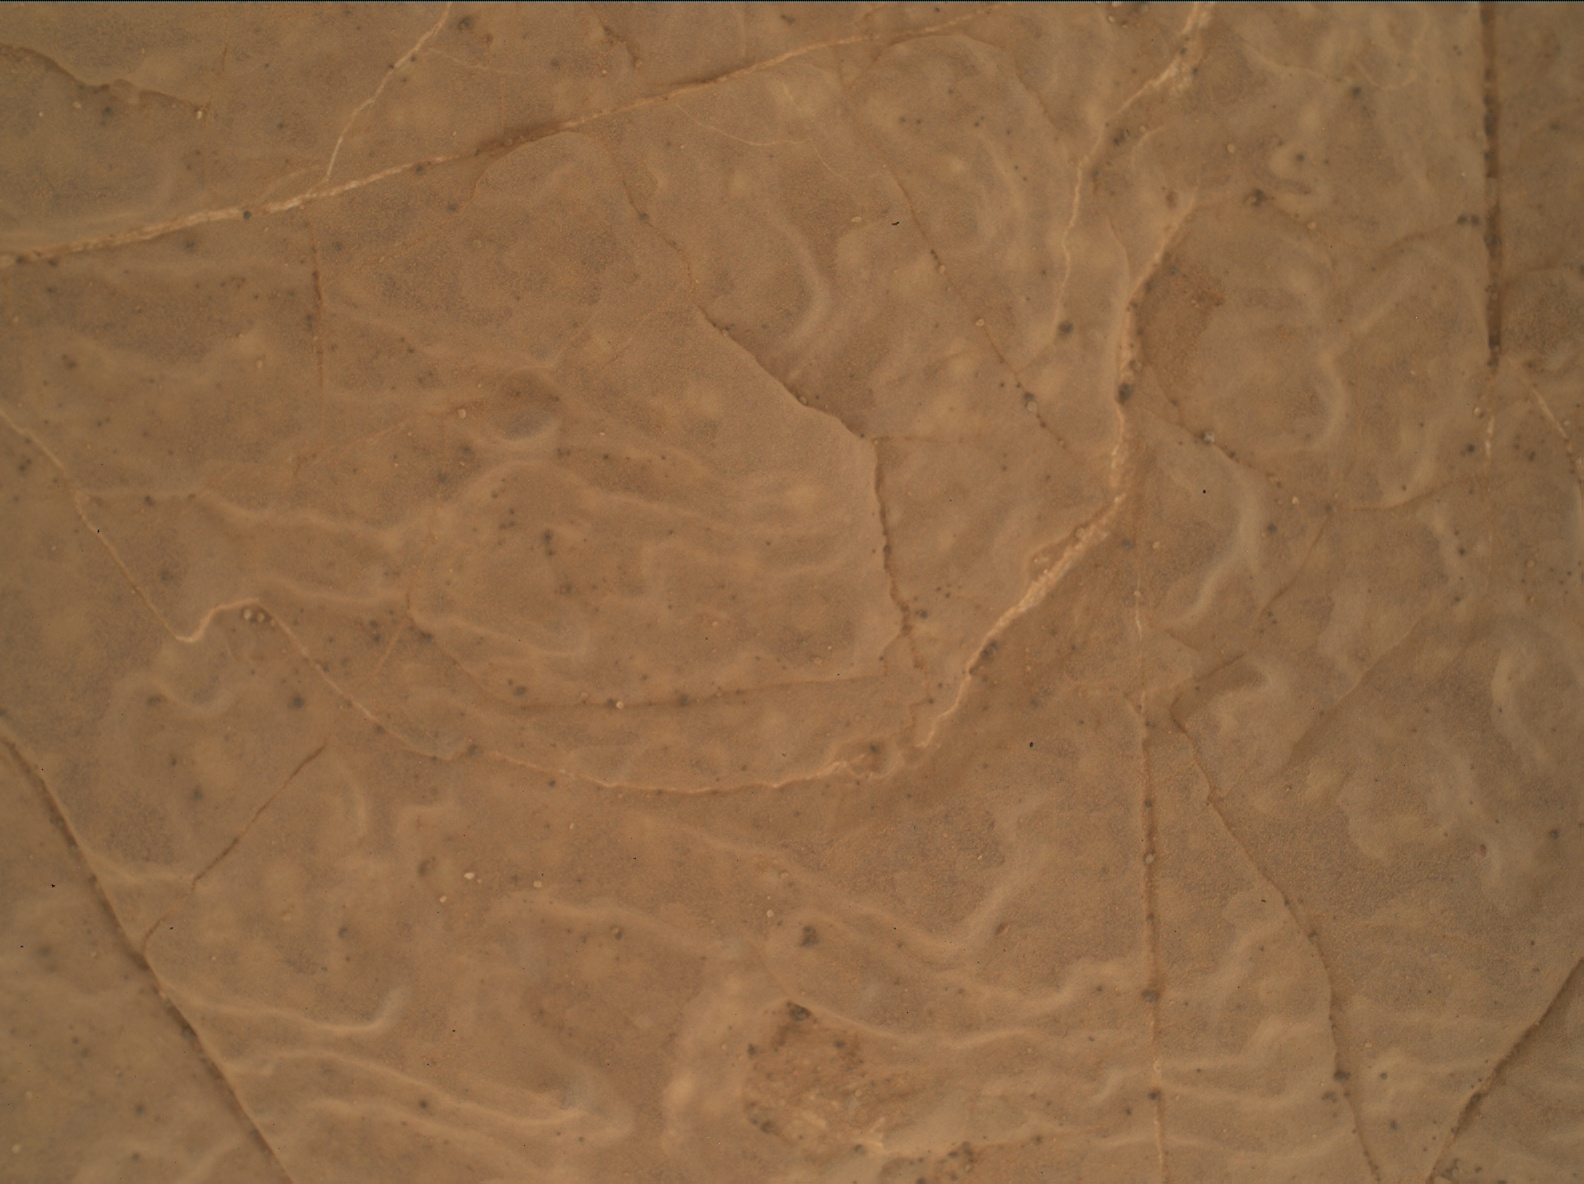 Nasa's Mars rover Curiosity acquired this image using its Mars Hand Lens Imager (MAHLI) on Sol 3040